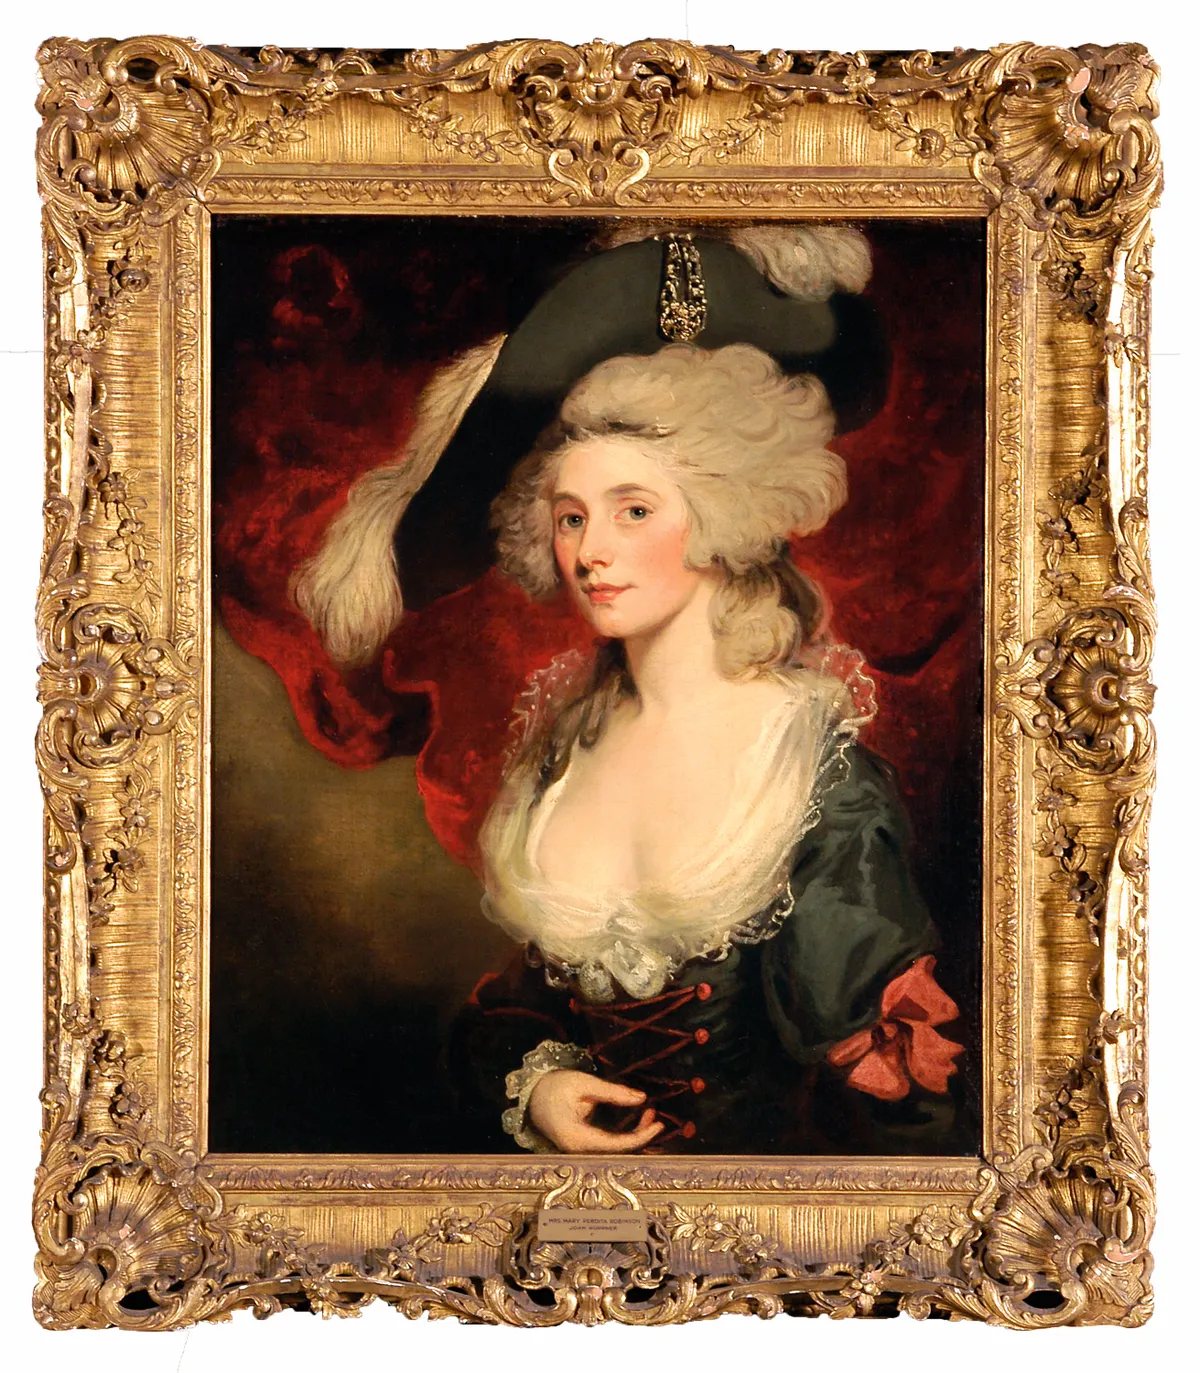 Emma’s favourite piece in the collection is this portrait of actress Mary Robinson, in her most famous role as Perdita in Shakespeare’s The Winter’s Tale.